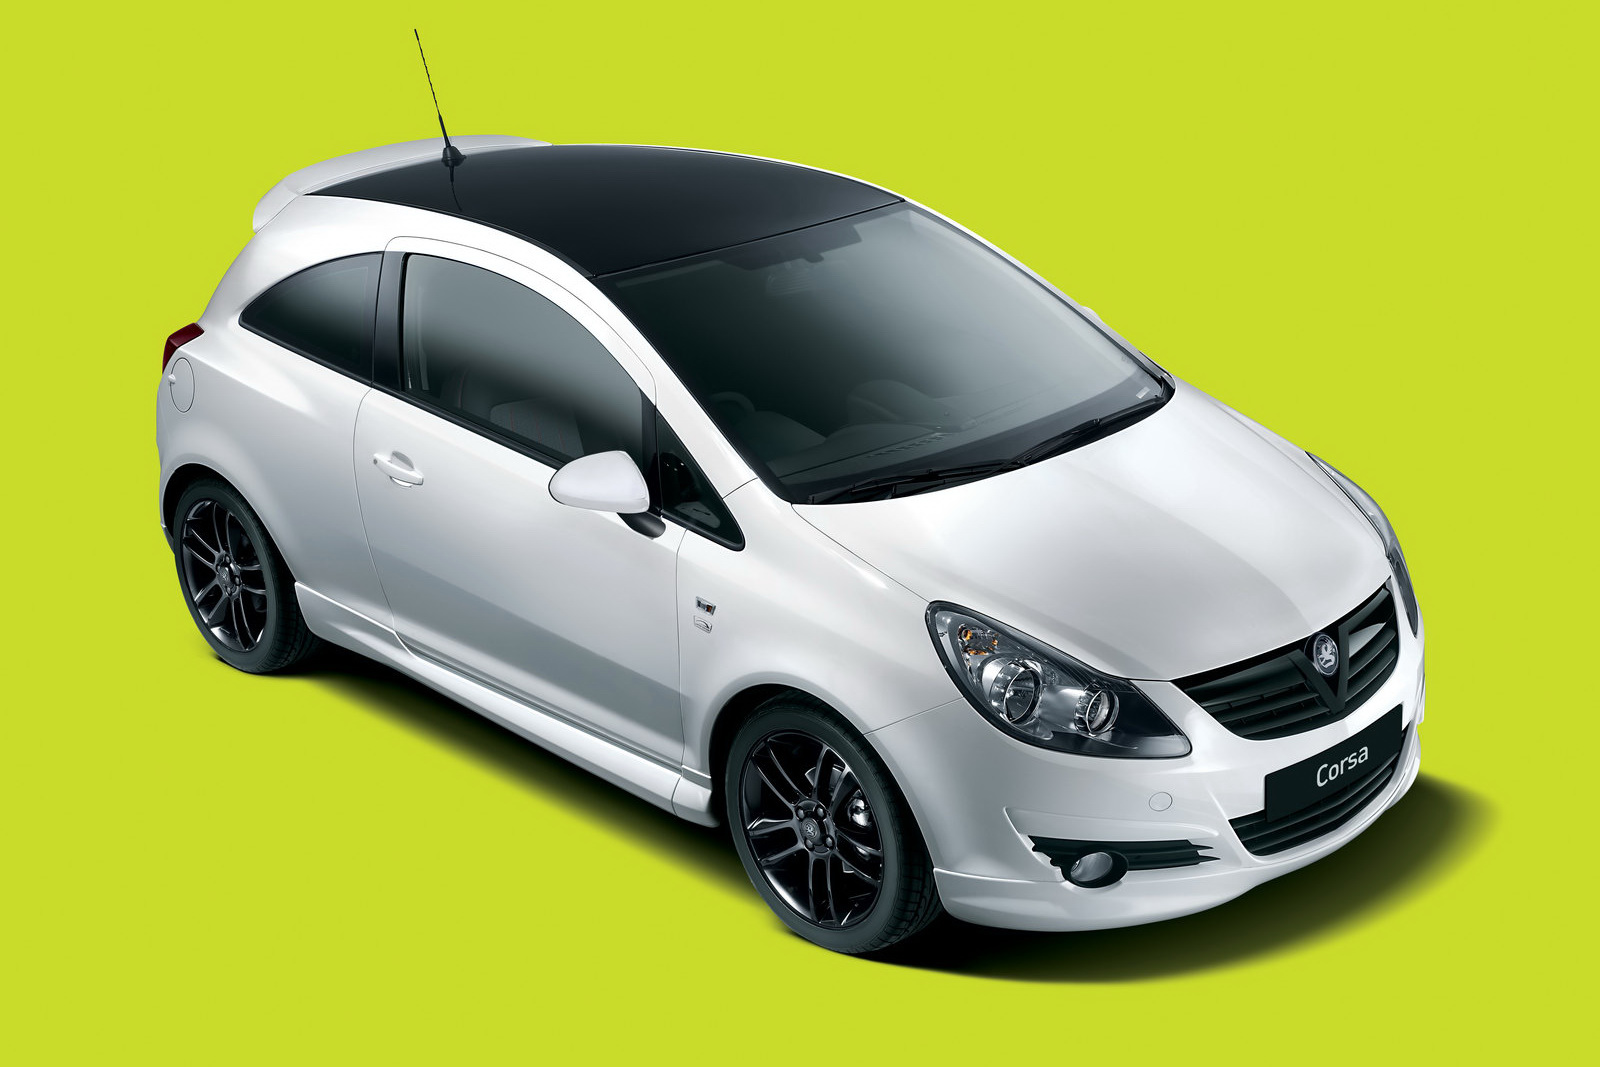 Black White Limited Edition Part Ii Vauxhall Corsa Carscoops